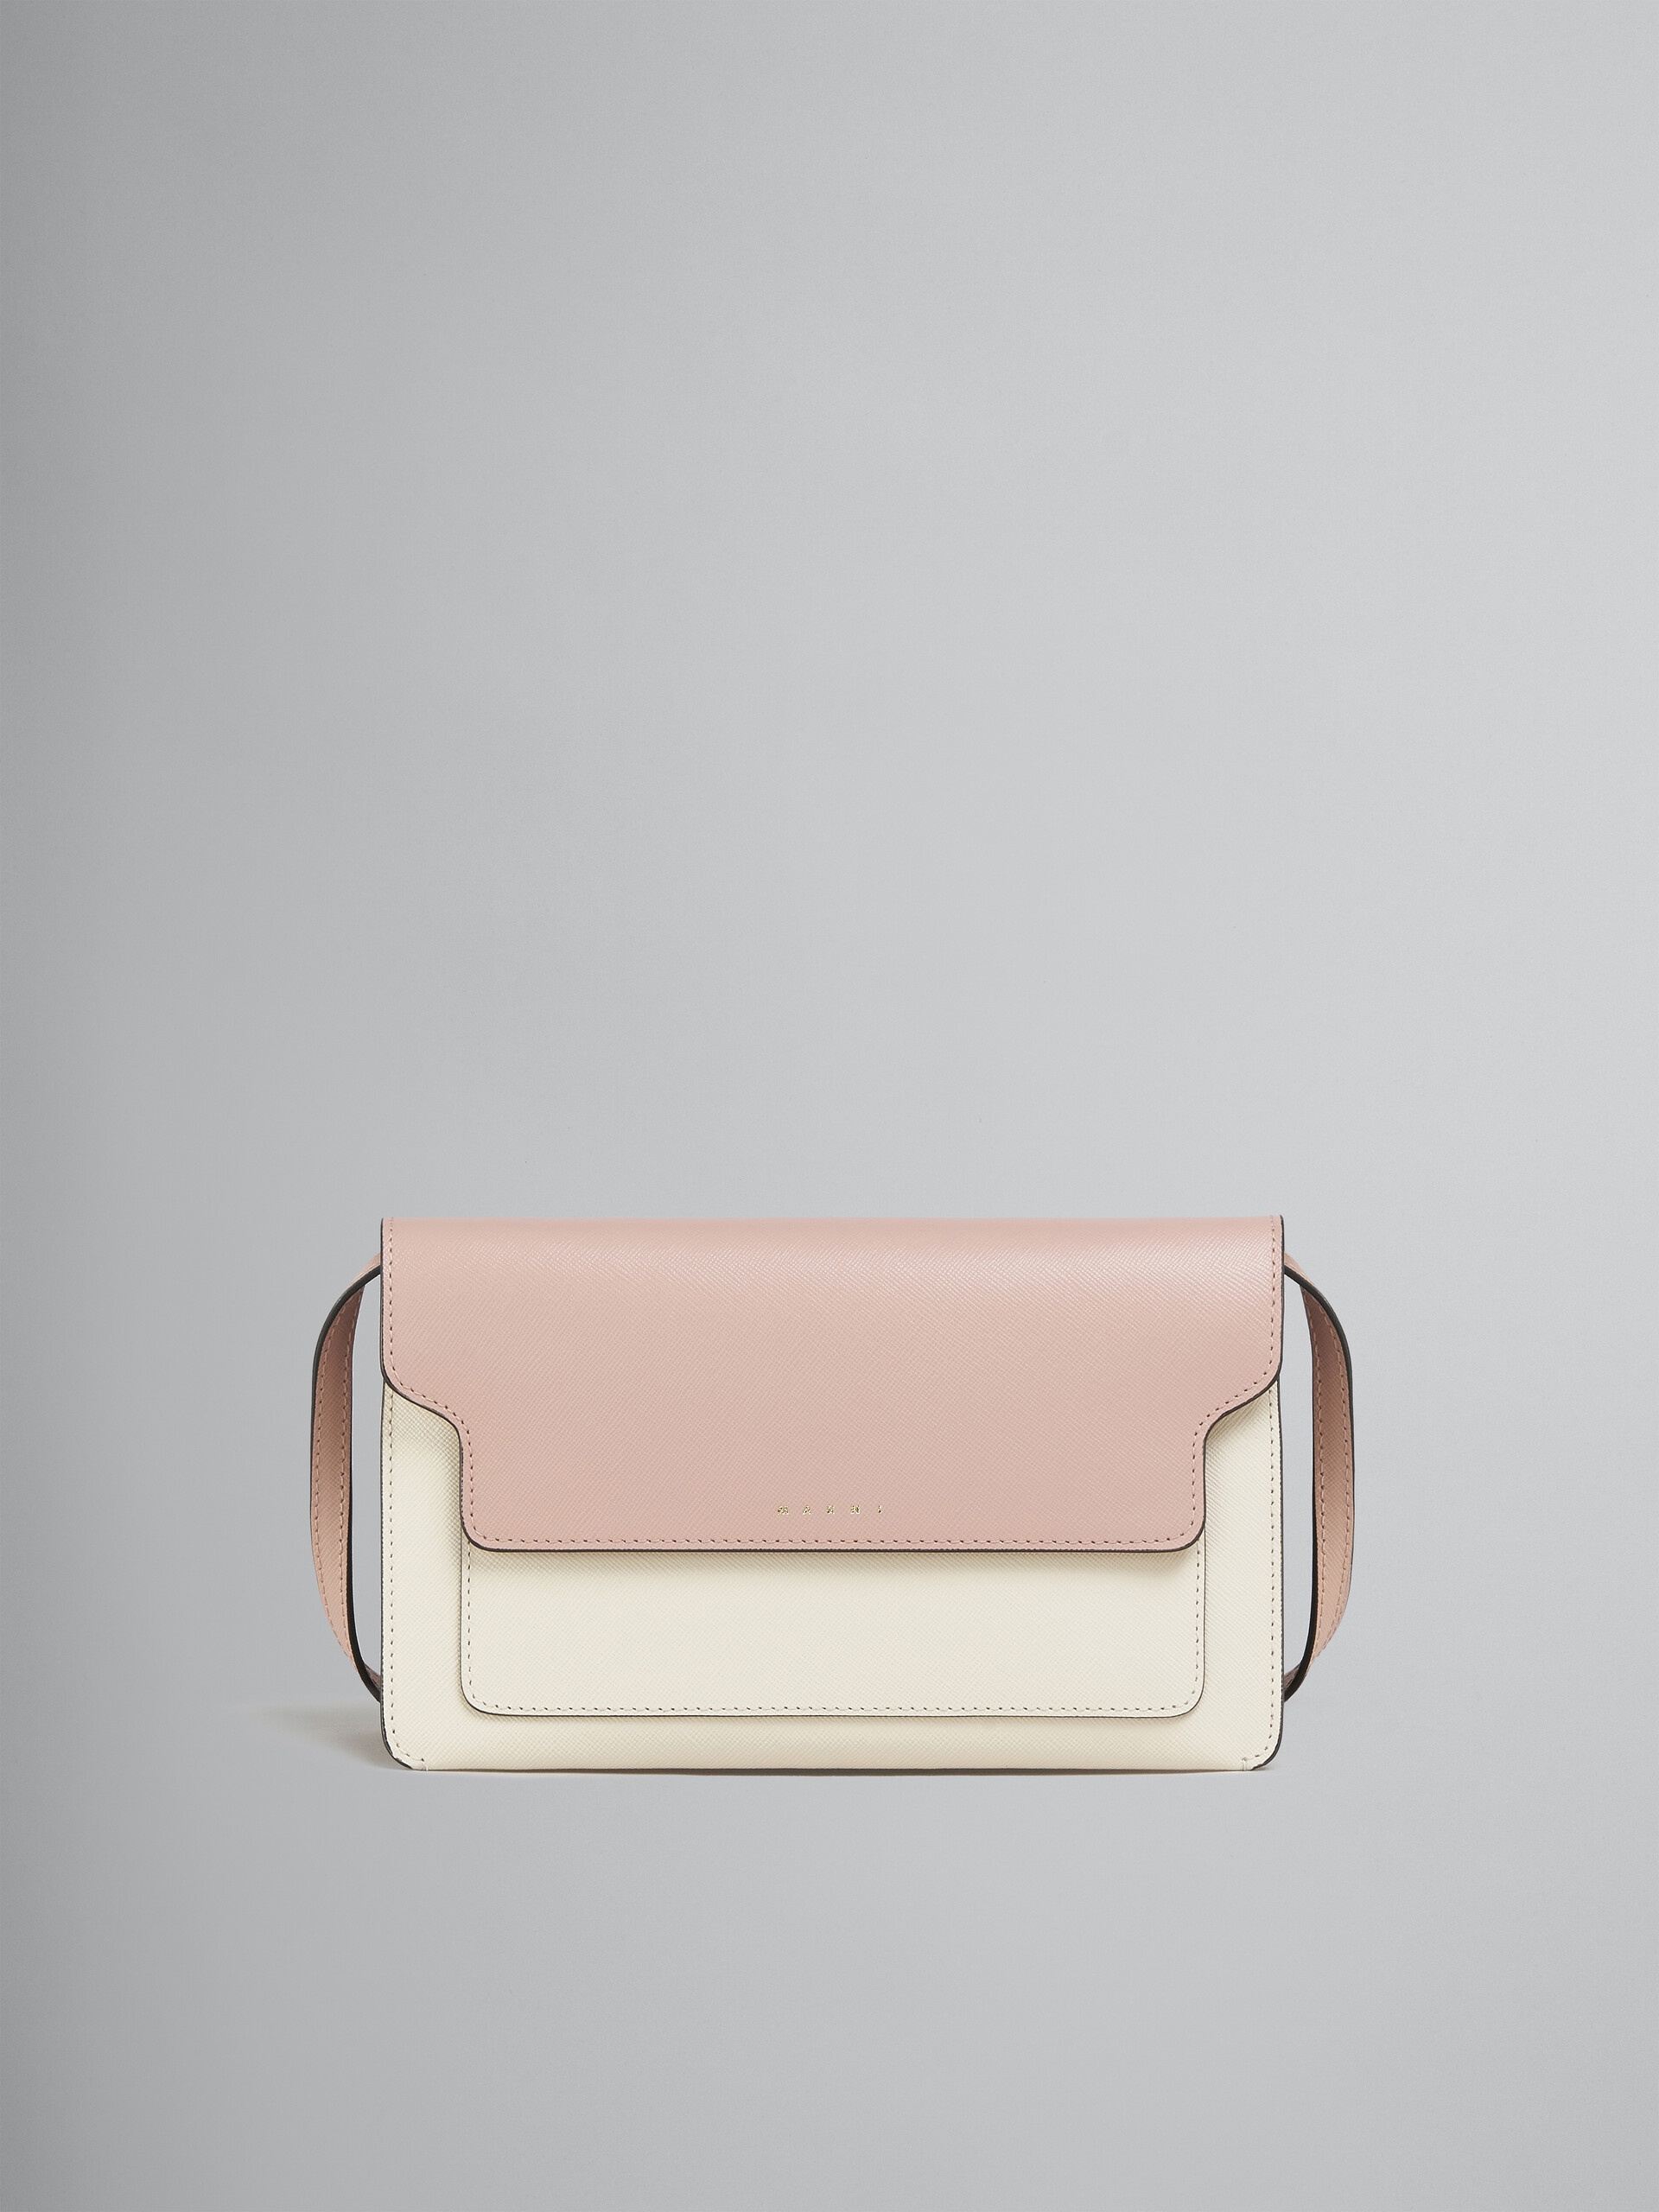 TRUNK CLUTCH IN PINK WHITE AND BEIGE SAFFIANO LEATHER - 1